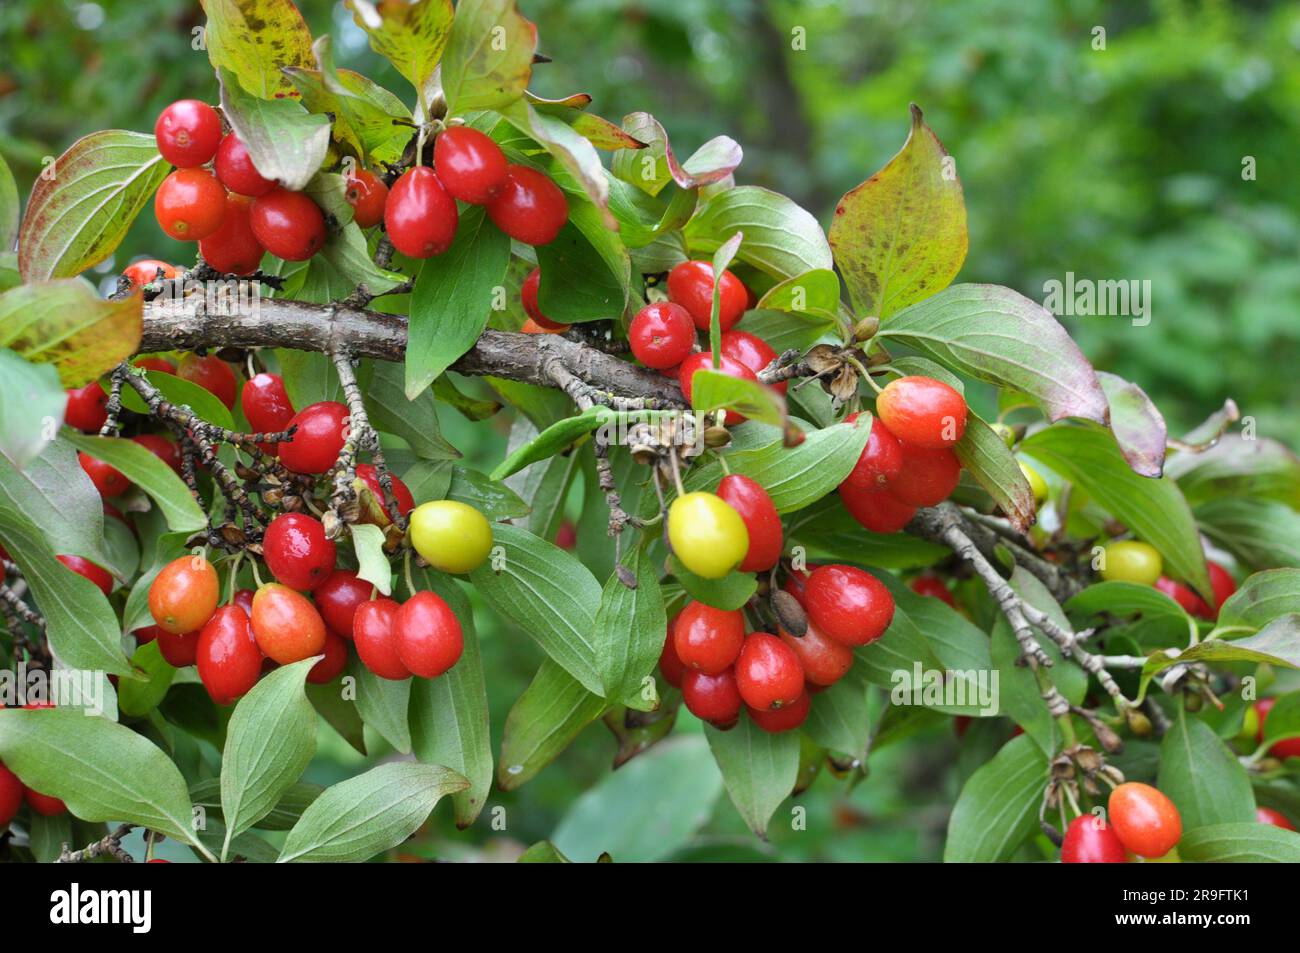 In the garden on a tree branch ripen dogwood fruits Stock Photo